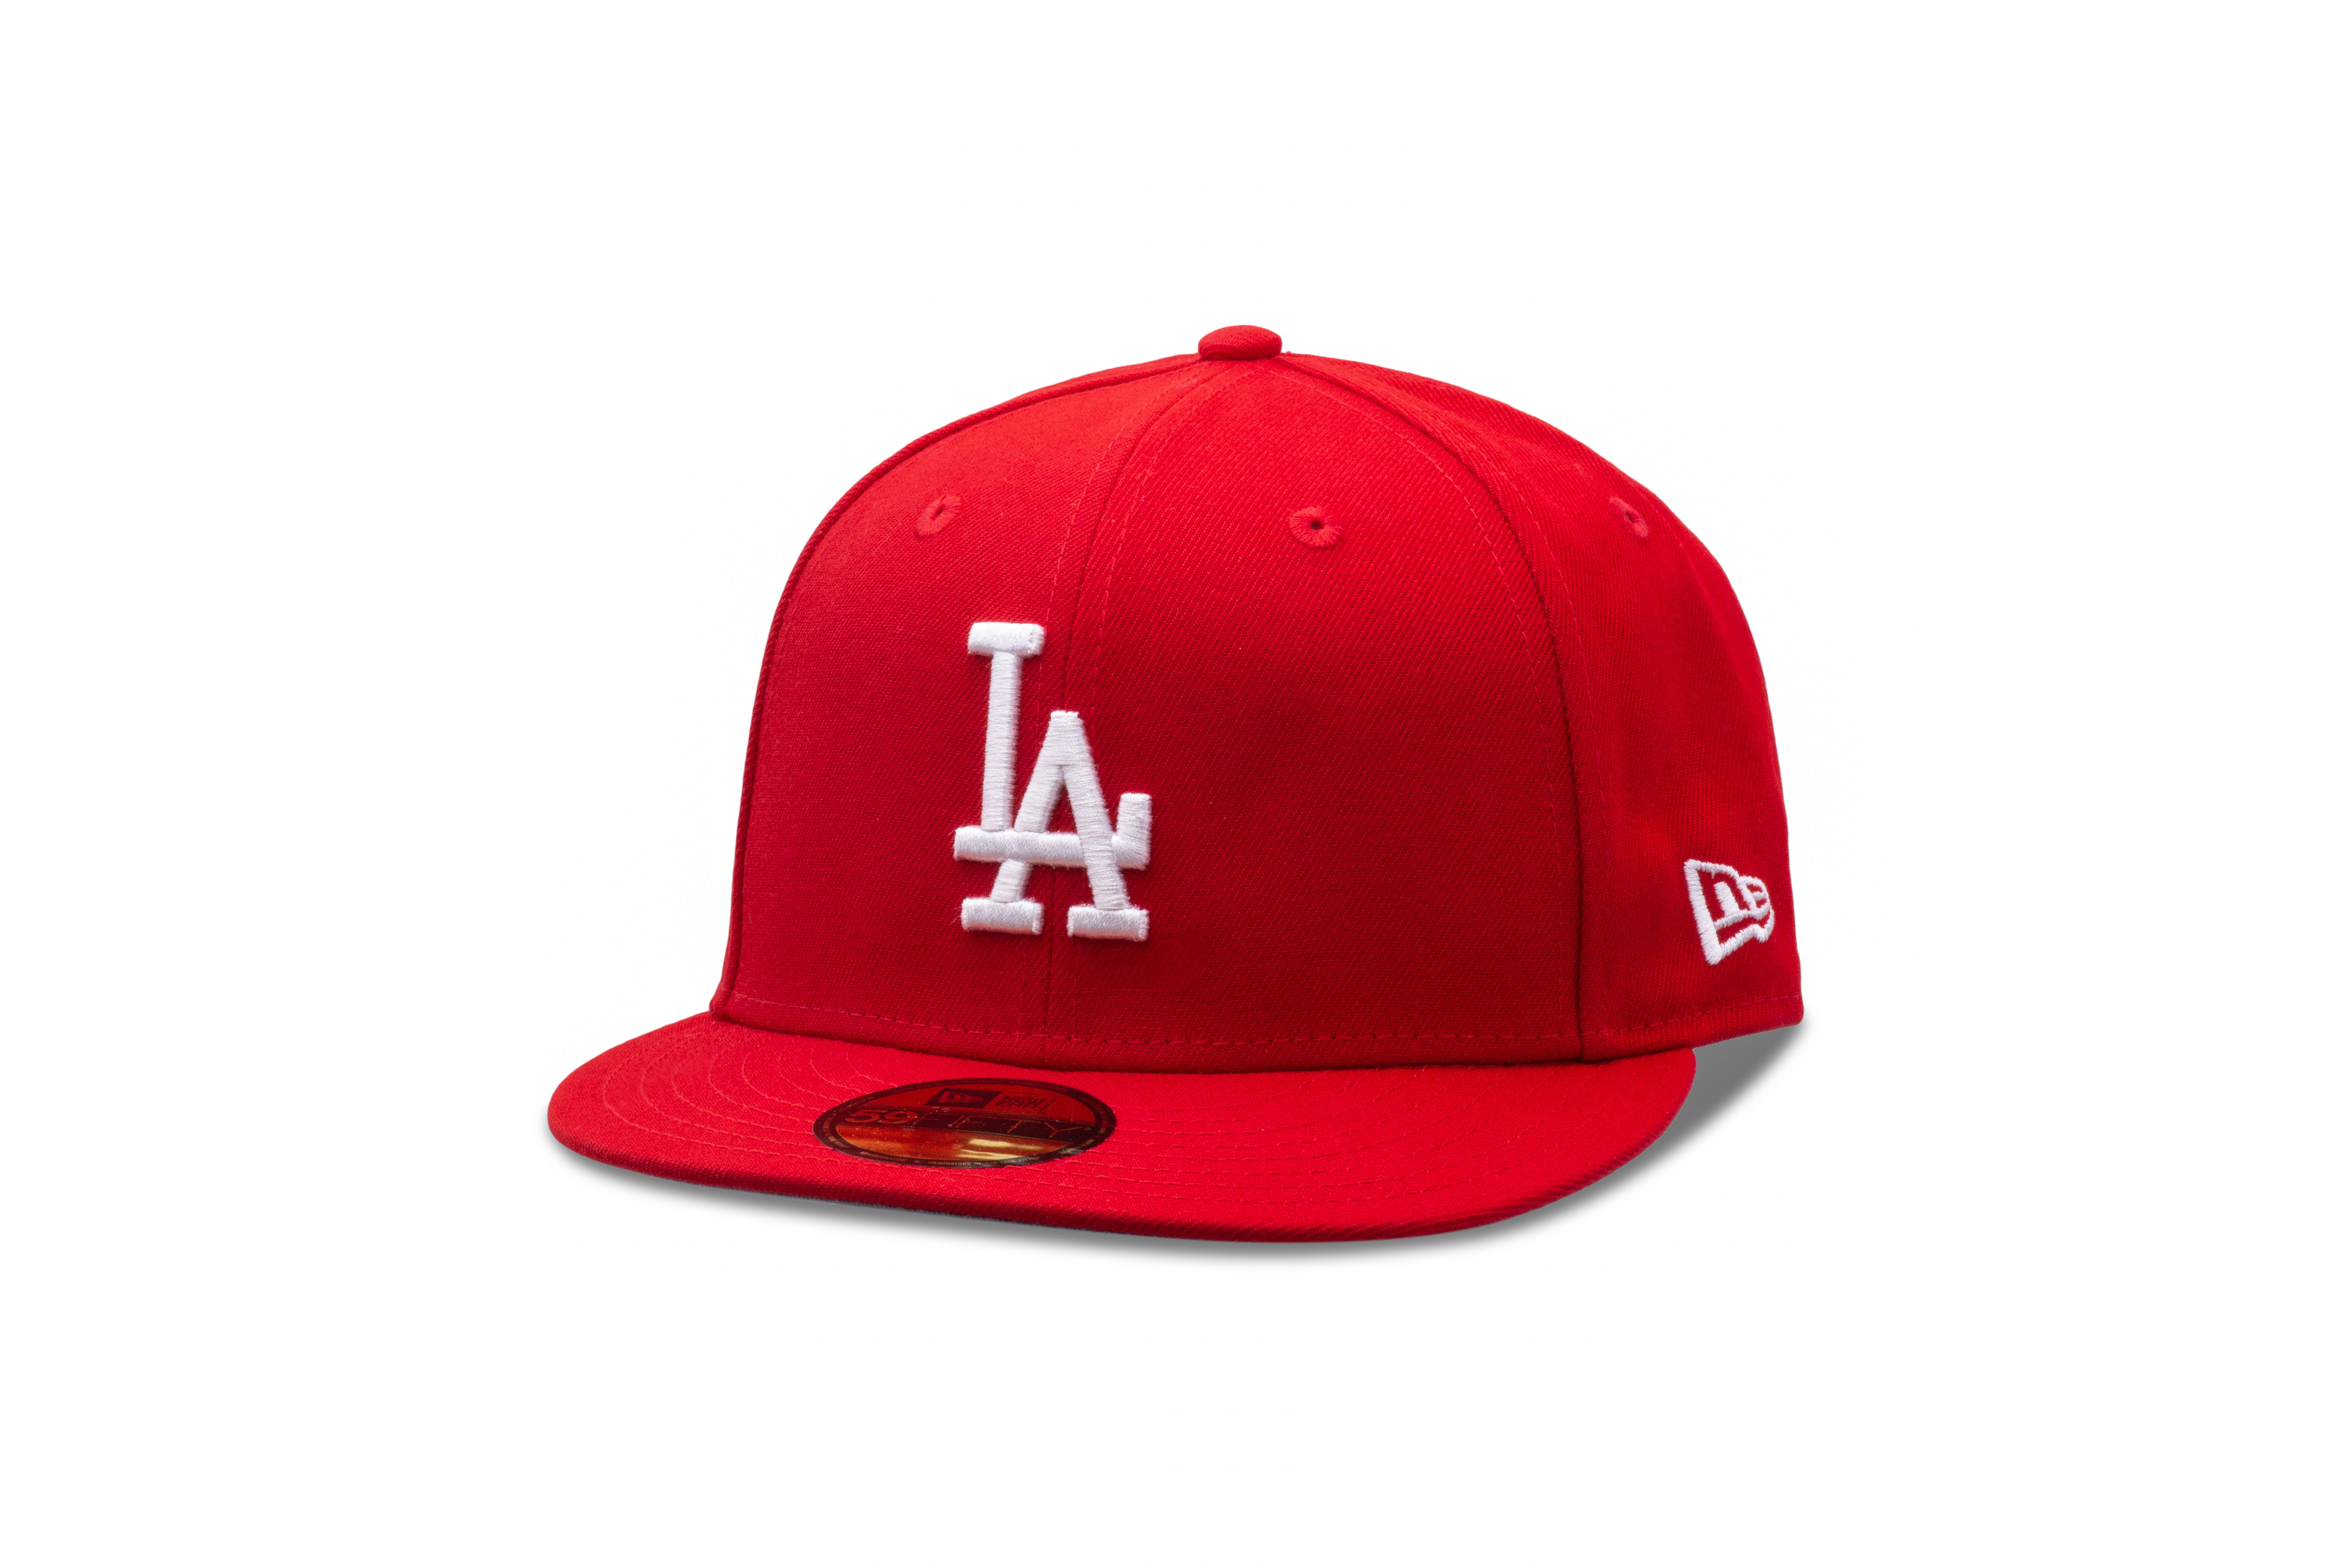 New Era MLB Basic Los Angeles Dodgers 59Fifty Fitted Baseball Cap - Scarlet Red - 7 1/8